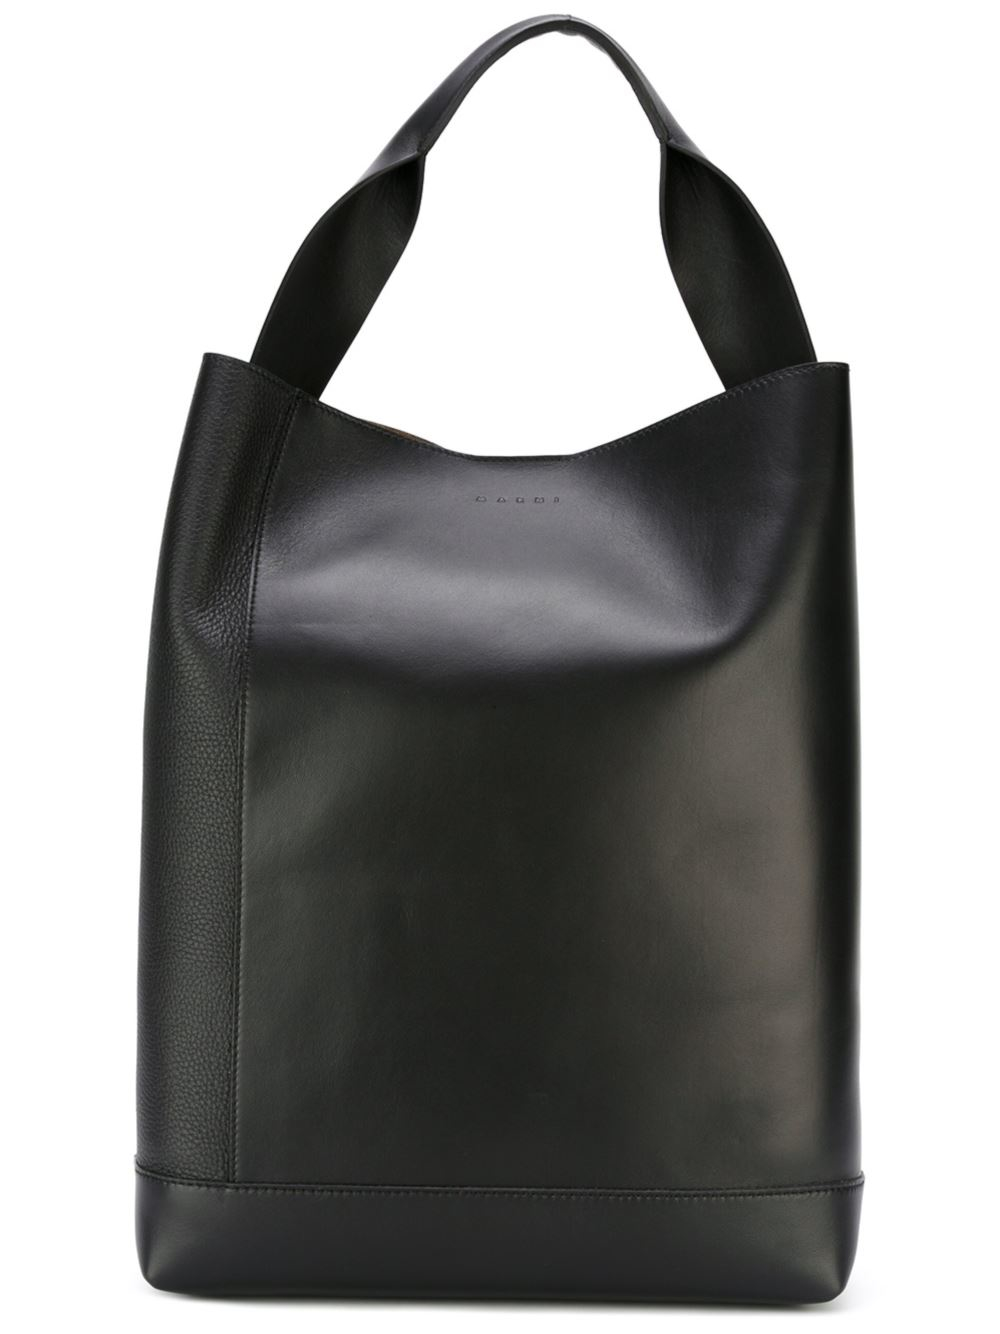 Marni Rectangular Leather Tote in Black | Lyst